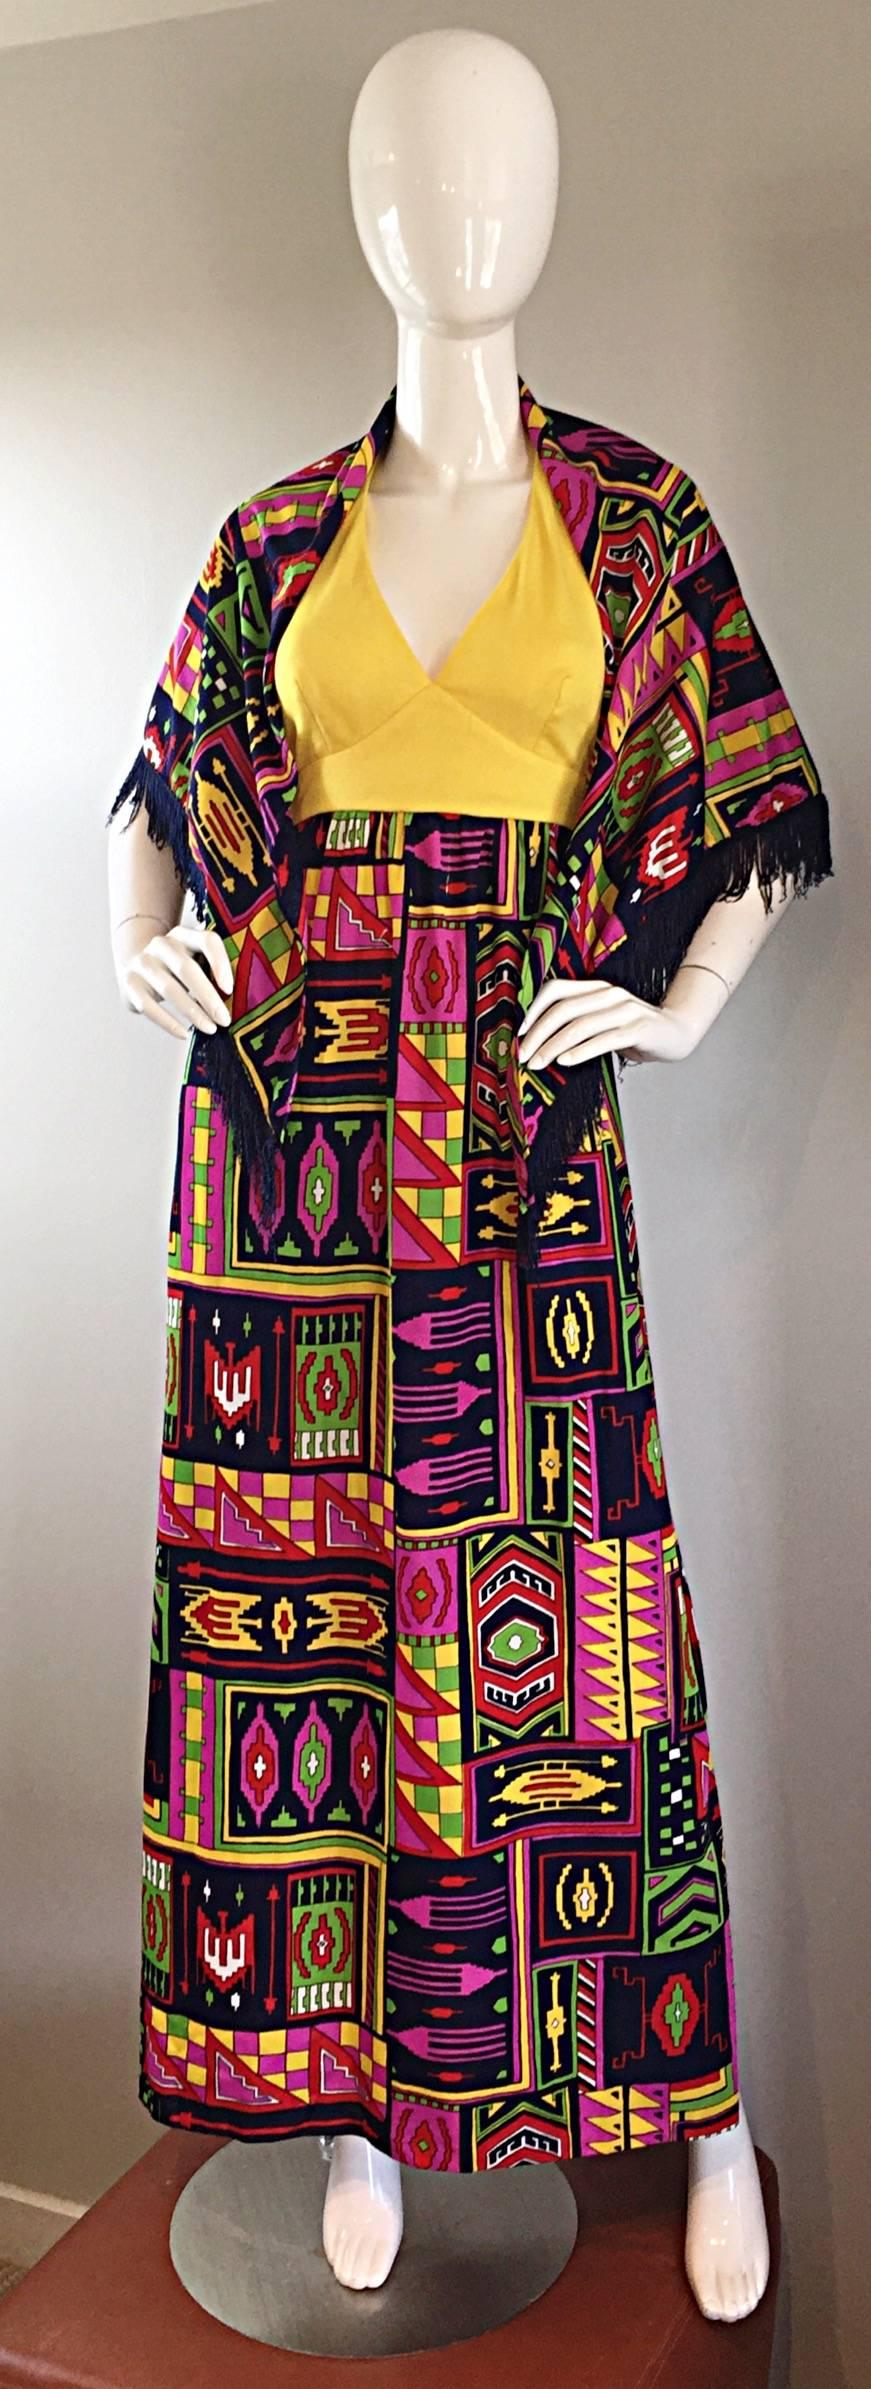 Beige Incredible 1970s Kelly Arden Colorful Yellow Vintage Maxi Dress + Fringed Shawl